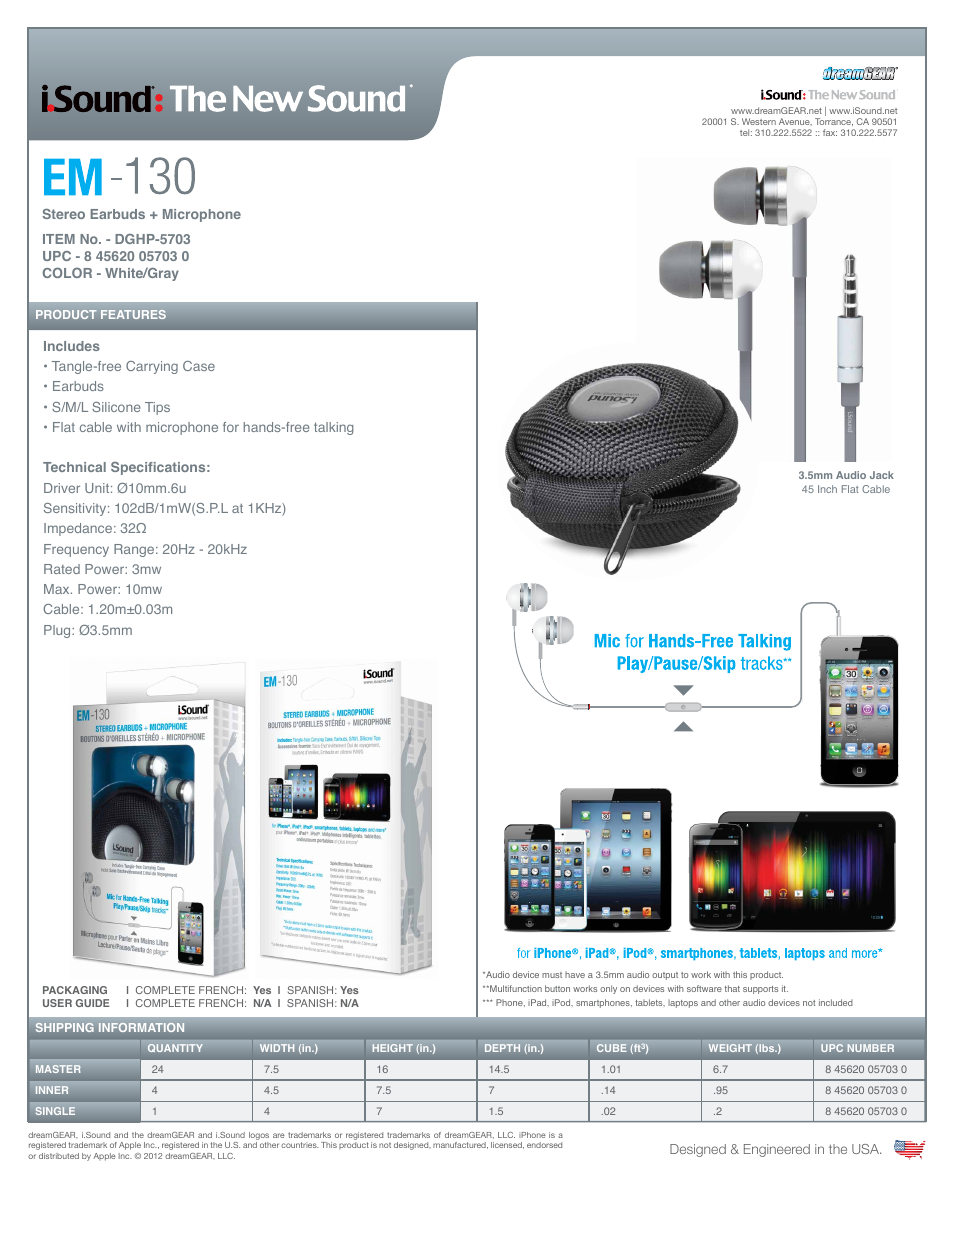 EM-130 Stereo Earbuds + Microphone - Sell Sheet